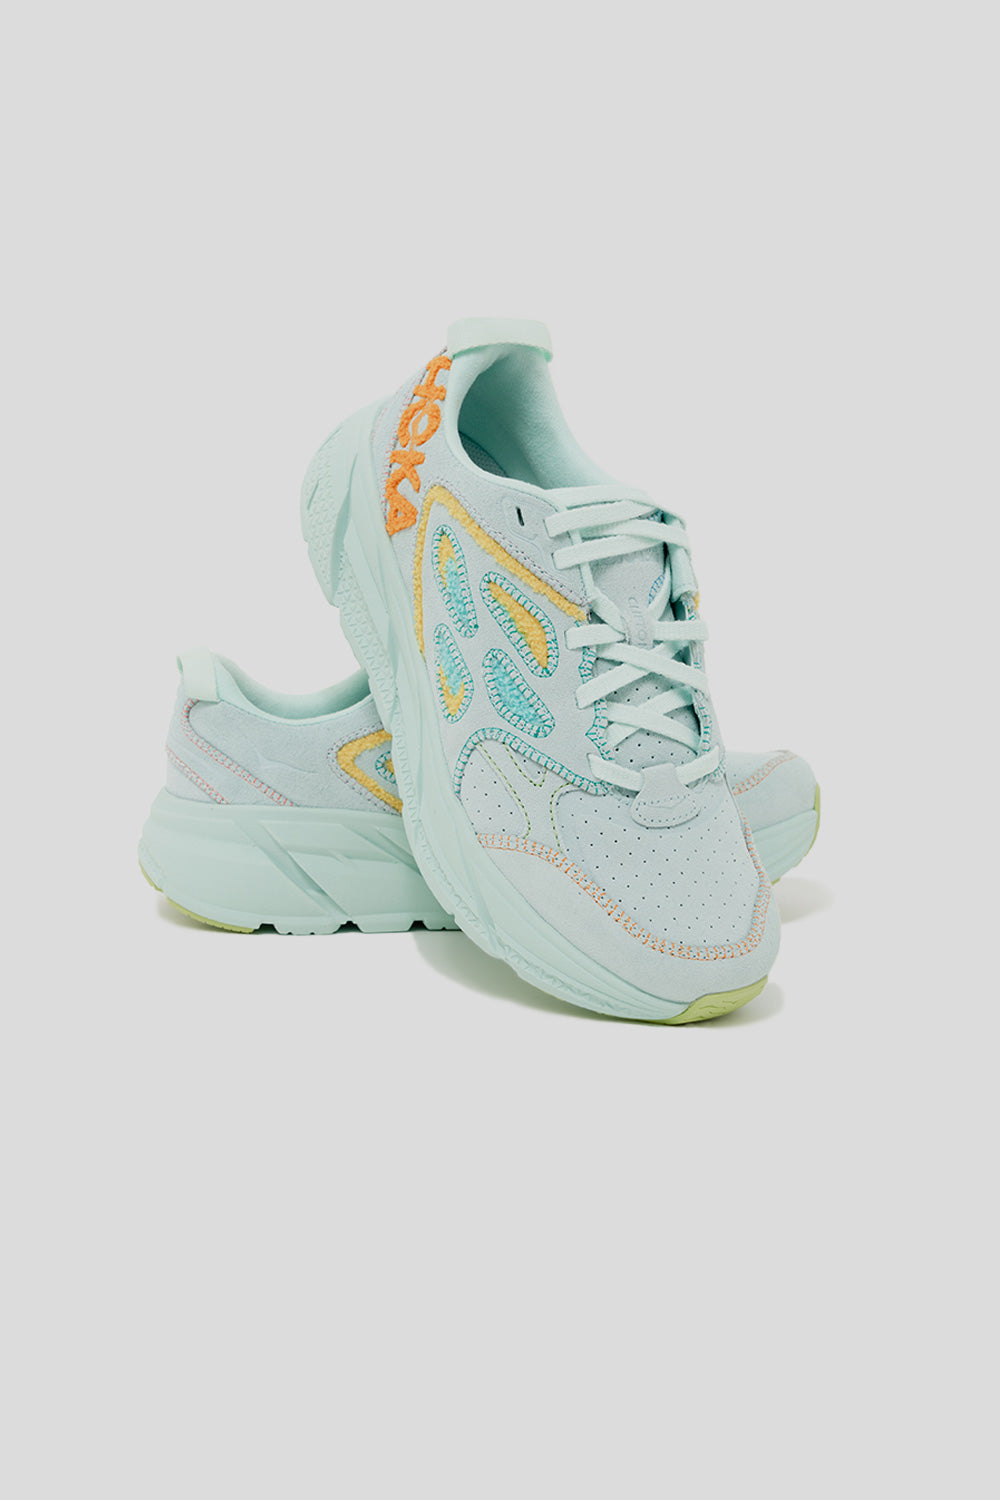 Hoka WMNS Clifton L Embroidery in Blue Glass/Radiant Yellow